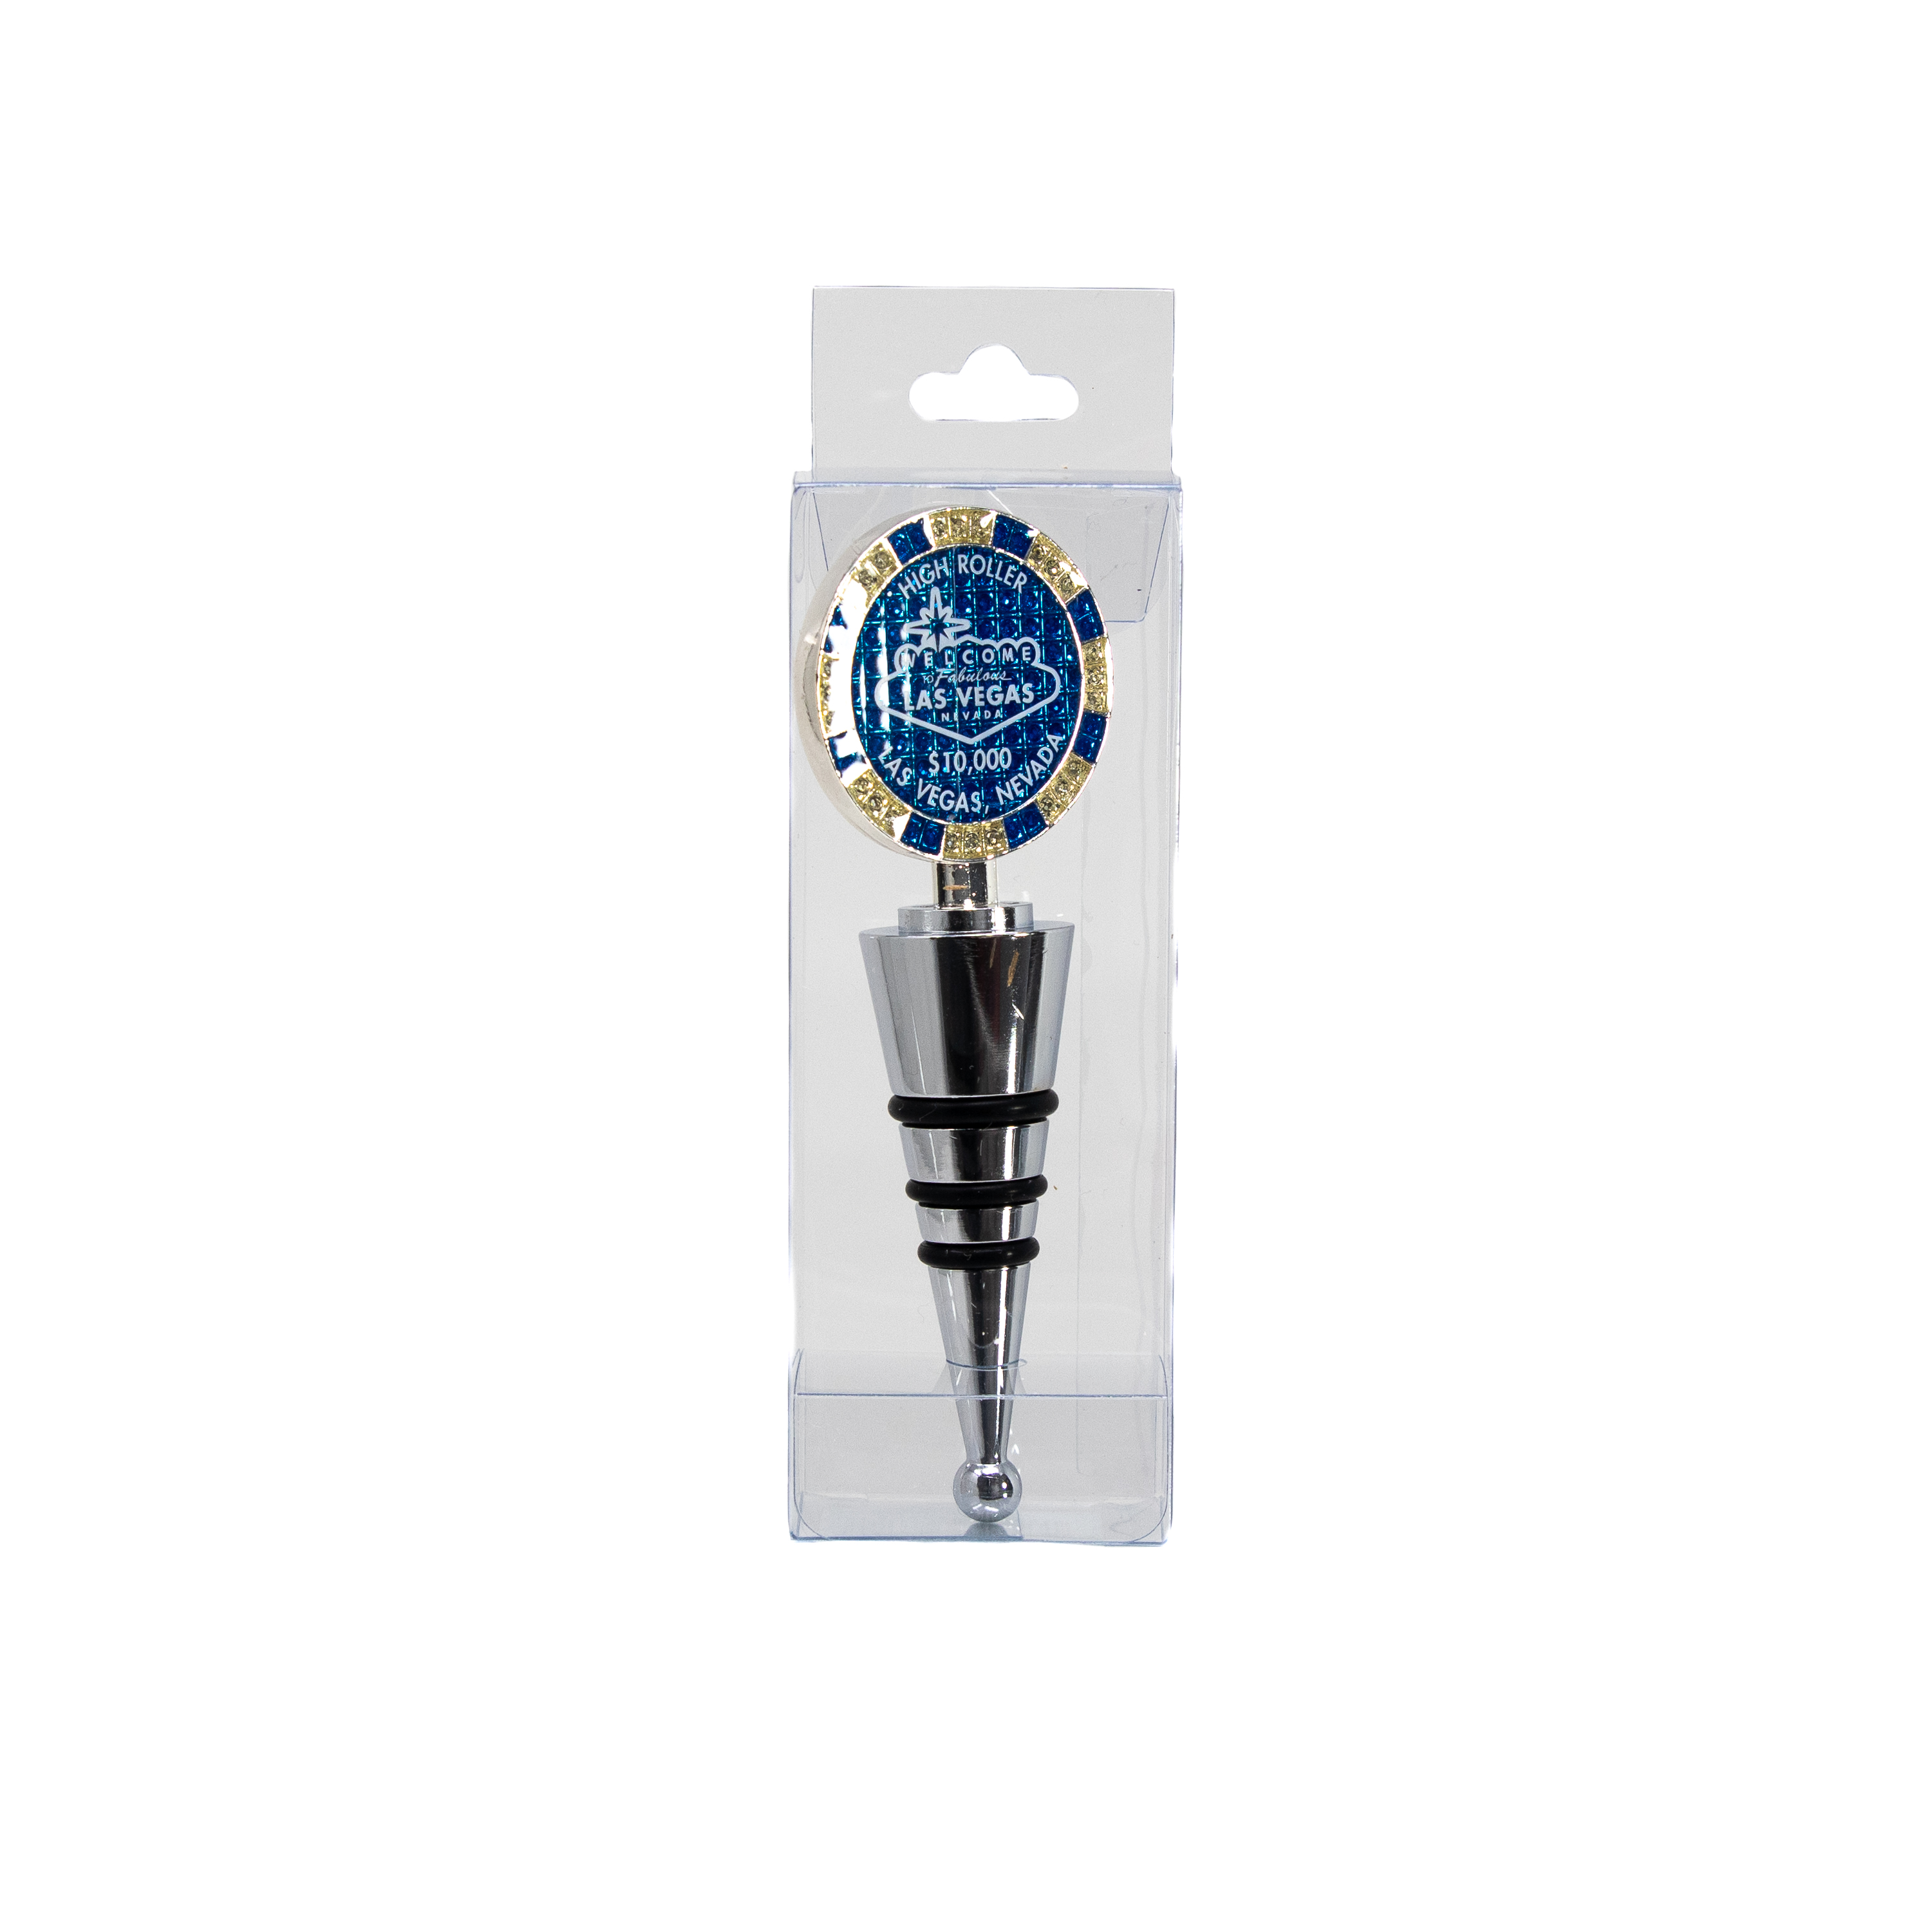 $10,000 Las Vegas Poker Chip Wine Stopper - Welcome to Las Vegas Sign Poker Chip Wine Stopper with Rubber Seal (Silver and Blue) - image 5 of 5